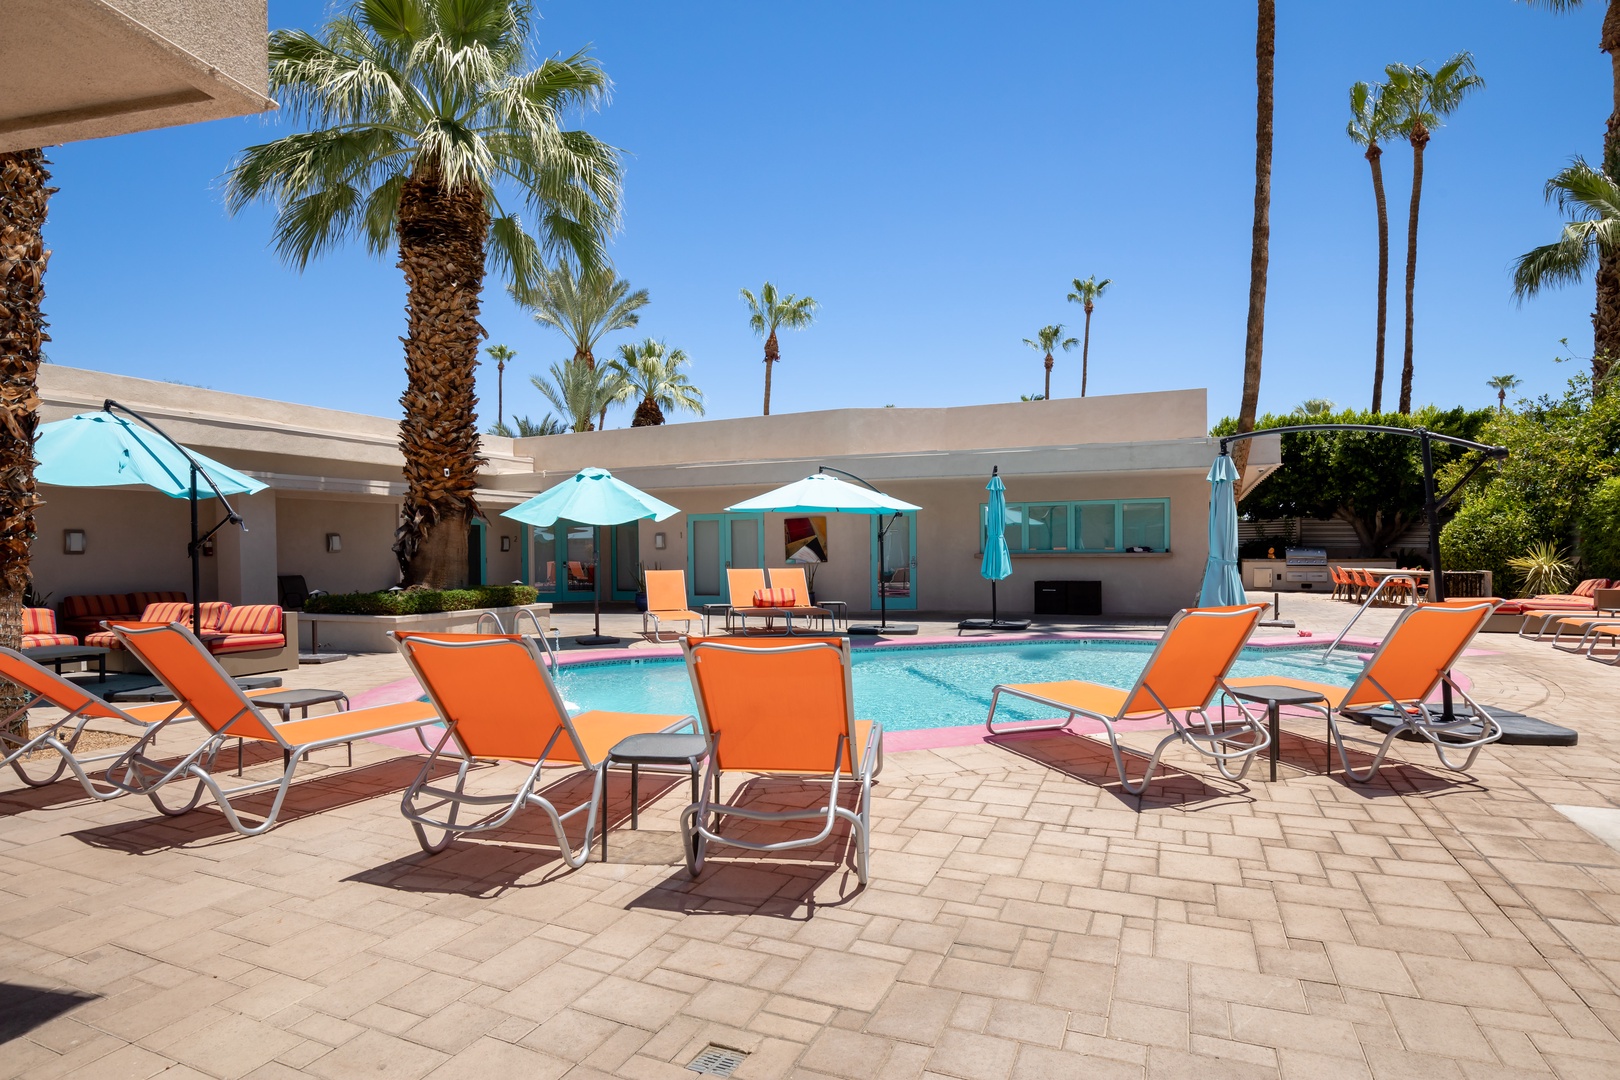 Hotel pool with Lounge chairs